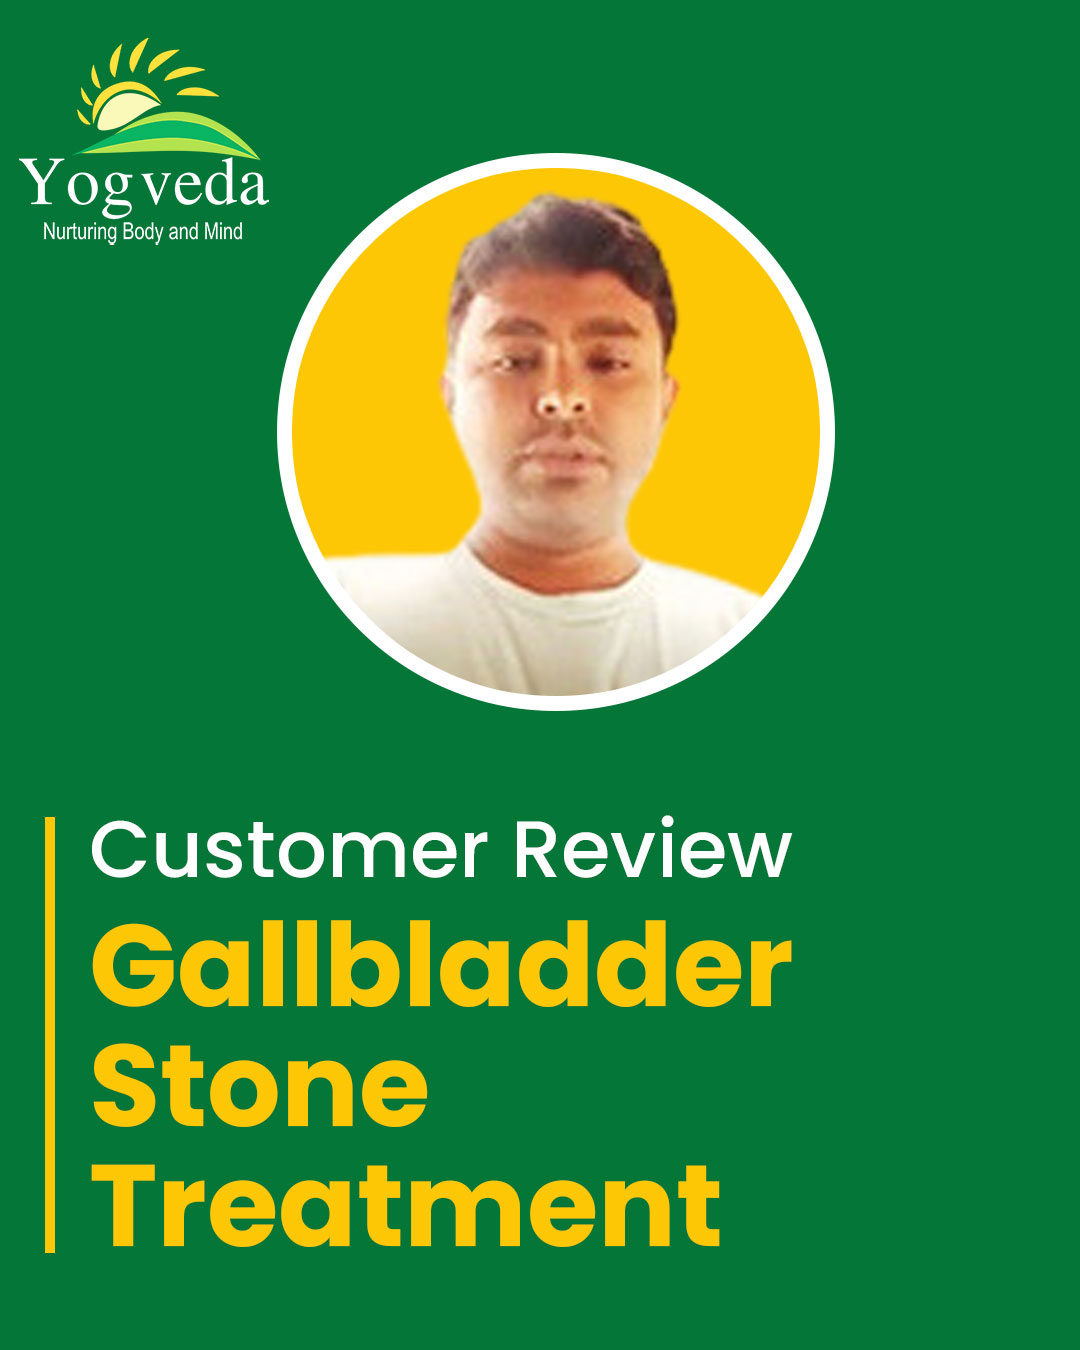 Customer Review - Gall bladder stone